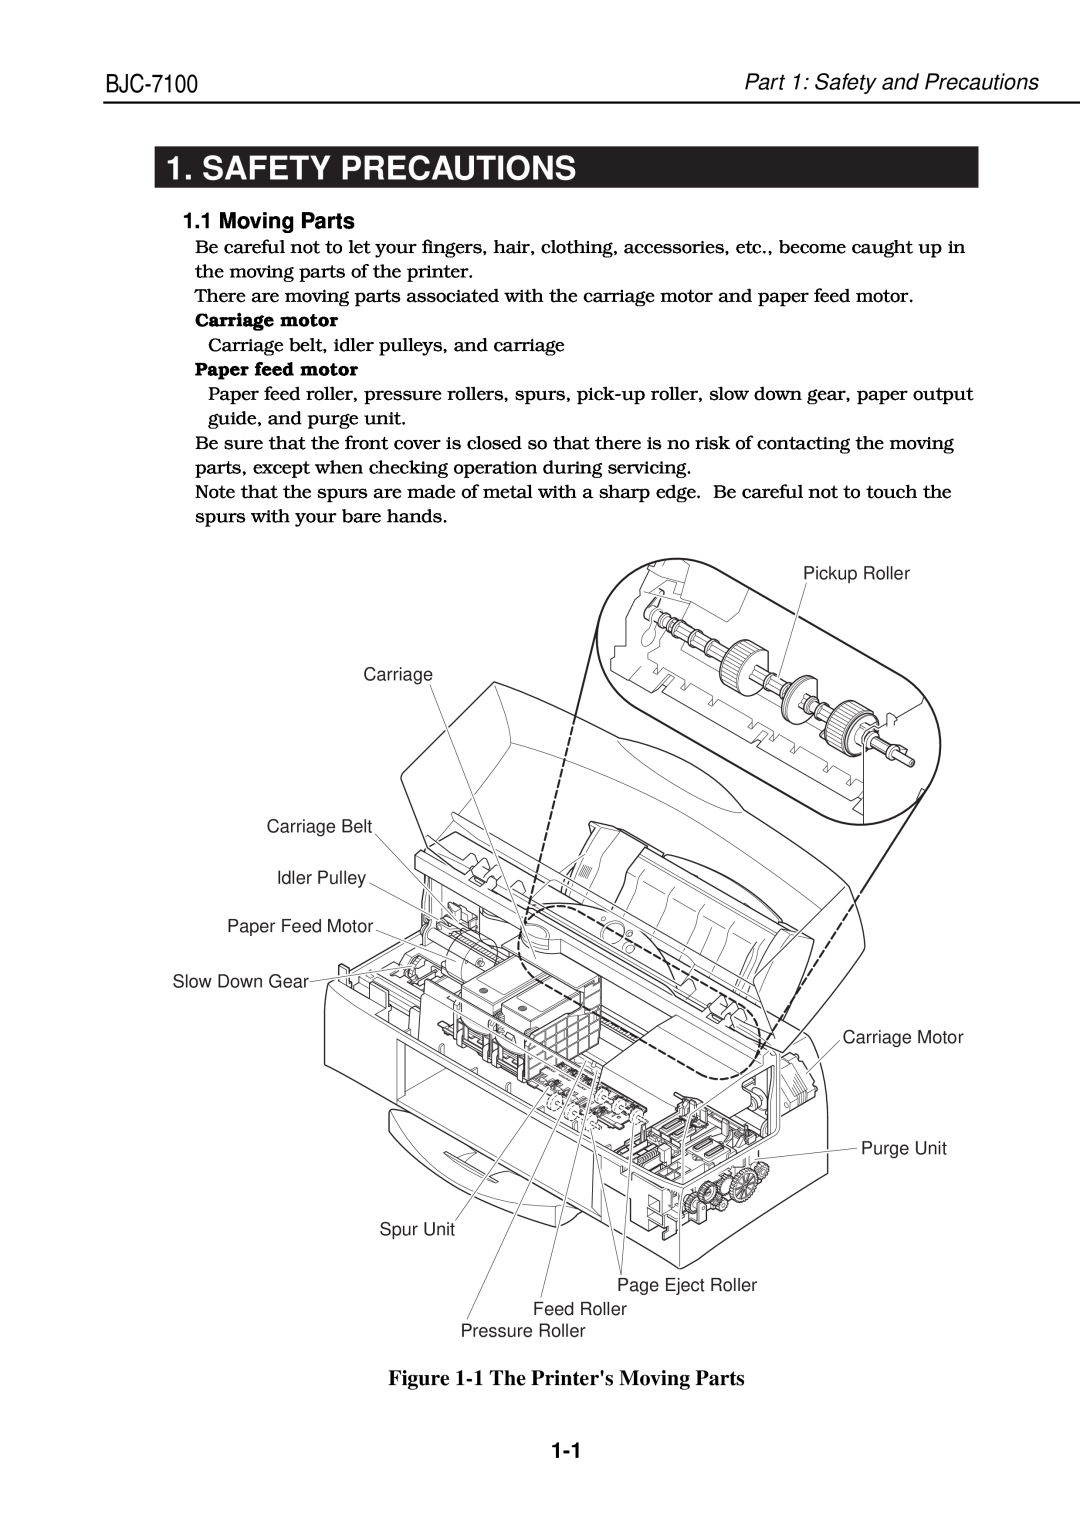 Canon QY8-1360-000 manual Safety Precautions, BJC-7100, 1 The Printers Moving Parts, Part 1 Safety and Precautions 